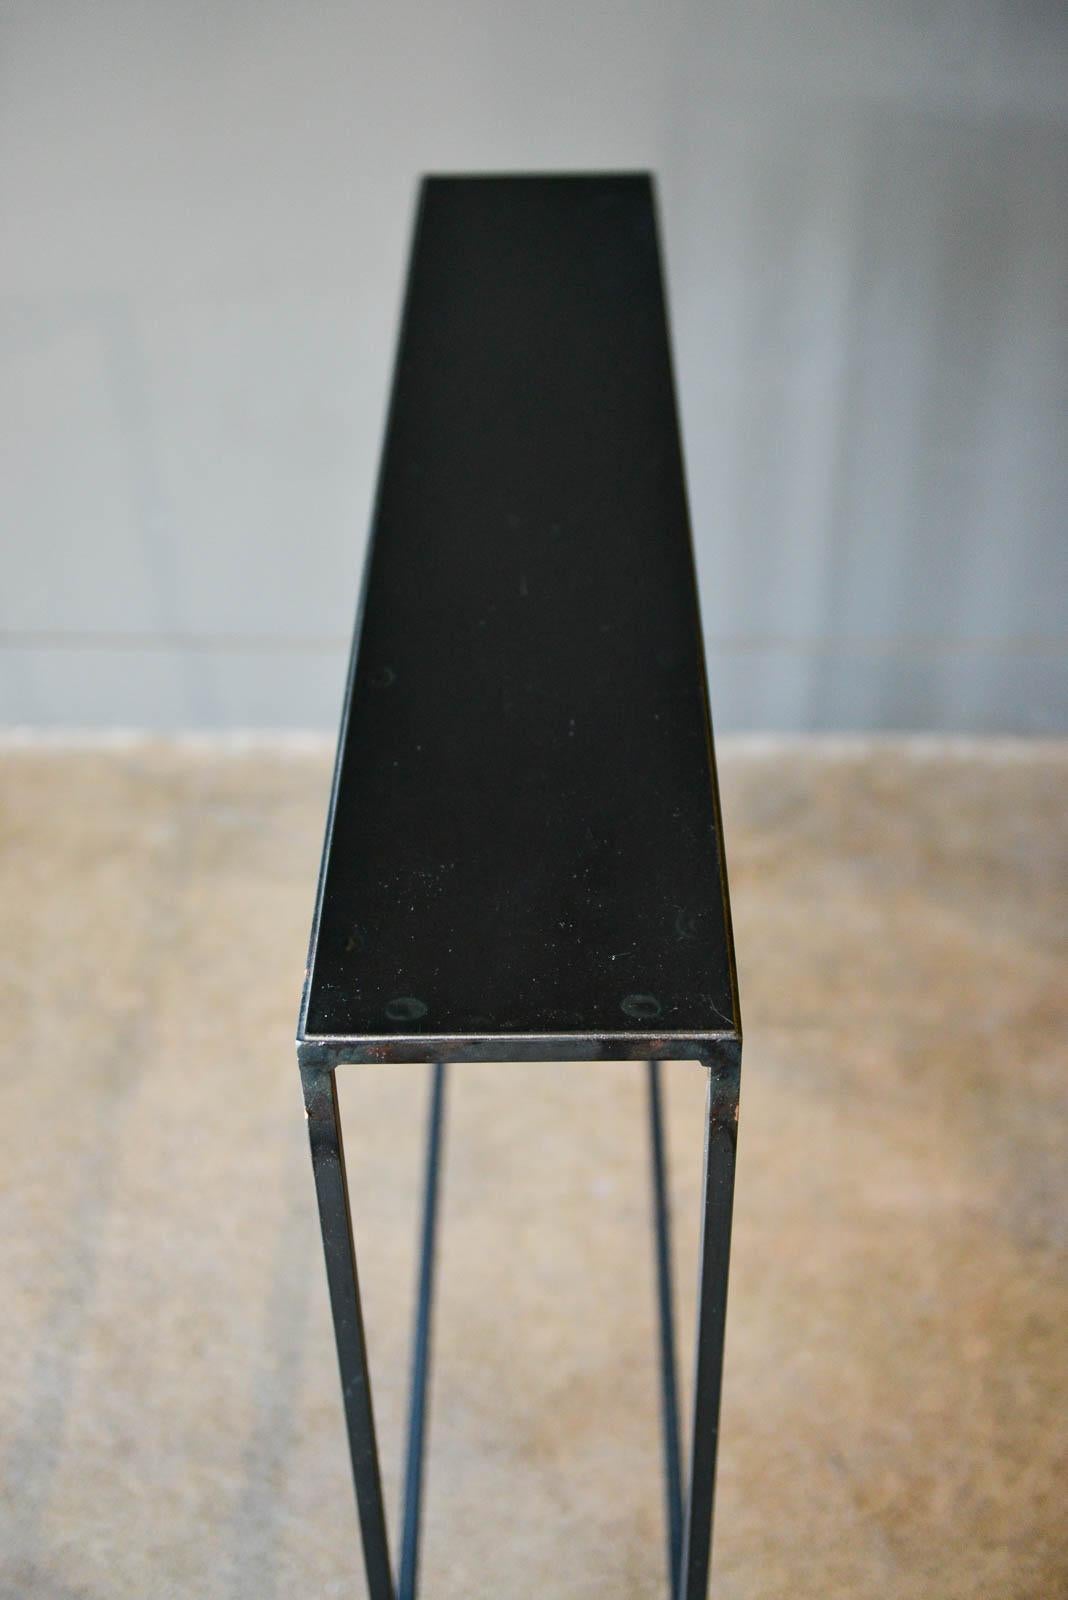 Iron and Melamine Petite Console Table, 1980 (amerikanisch)